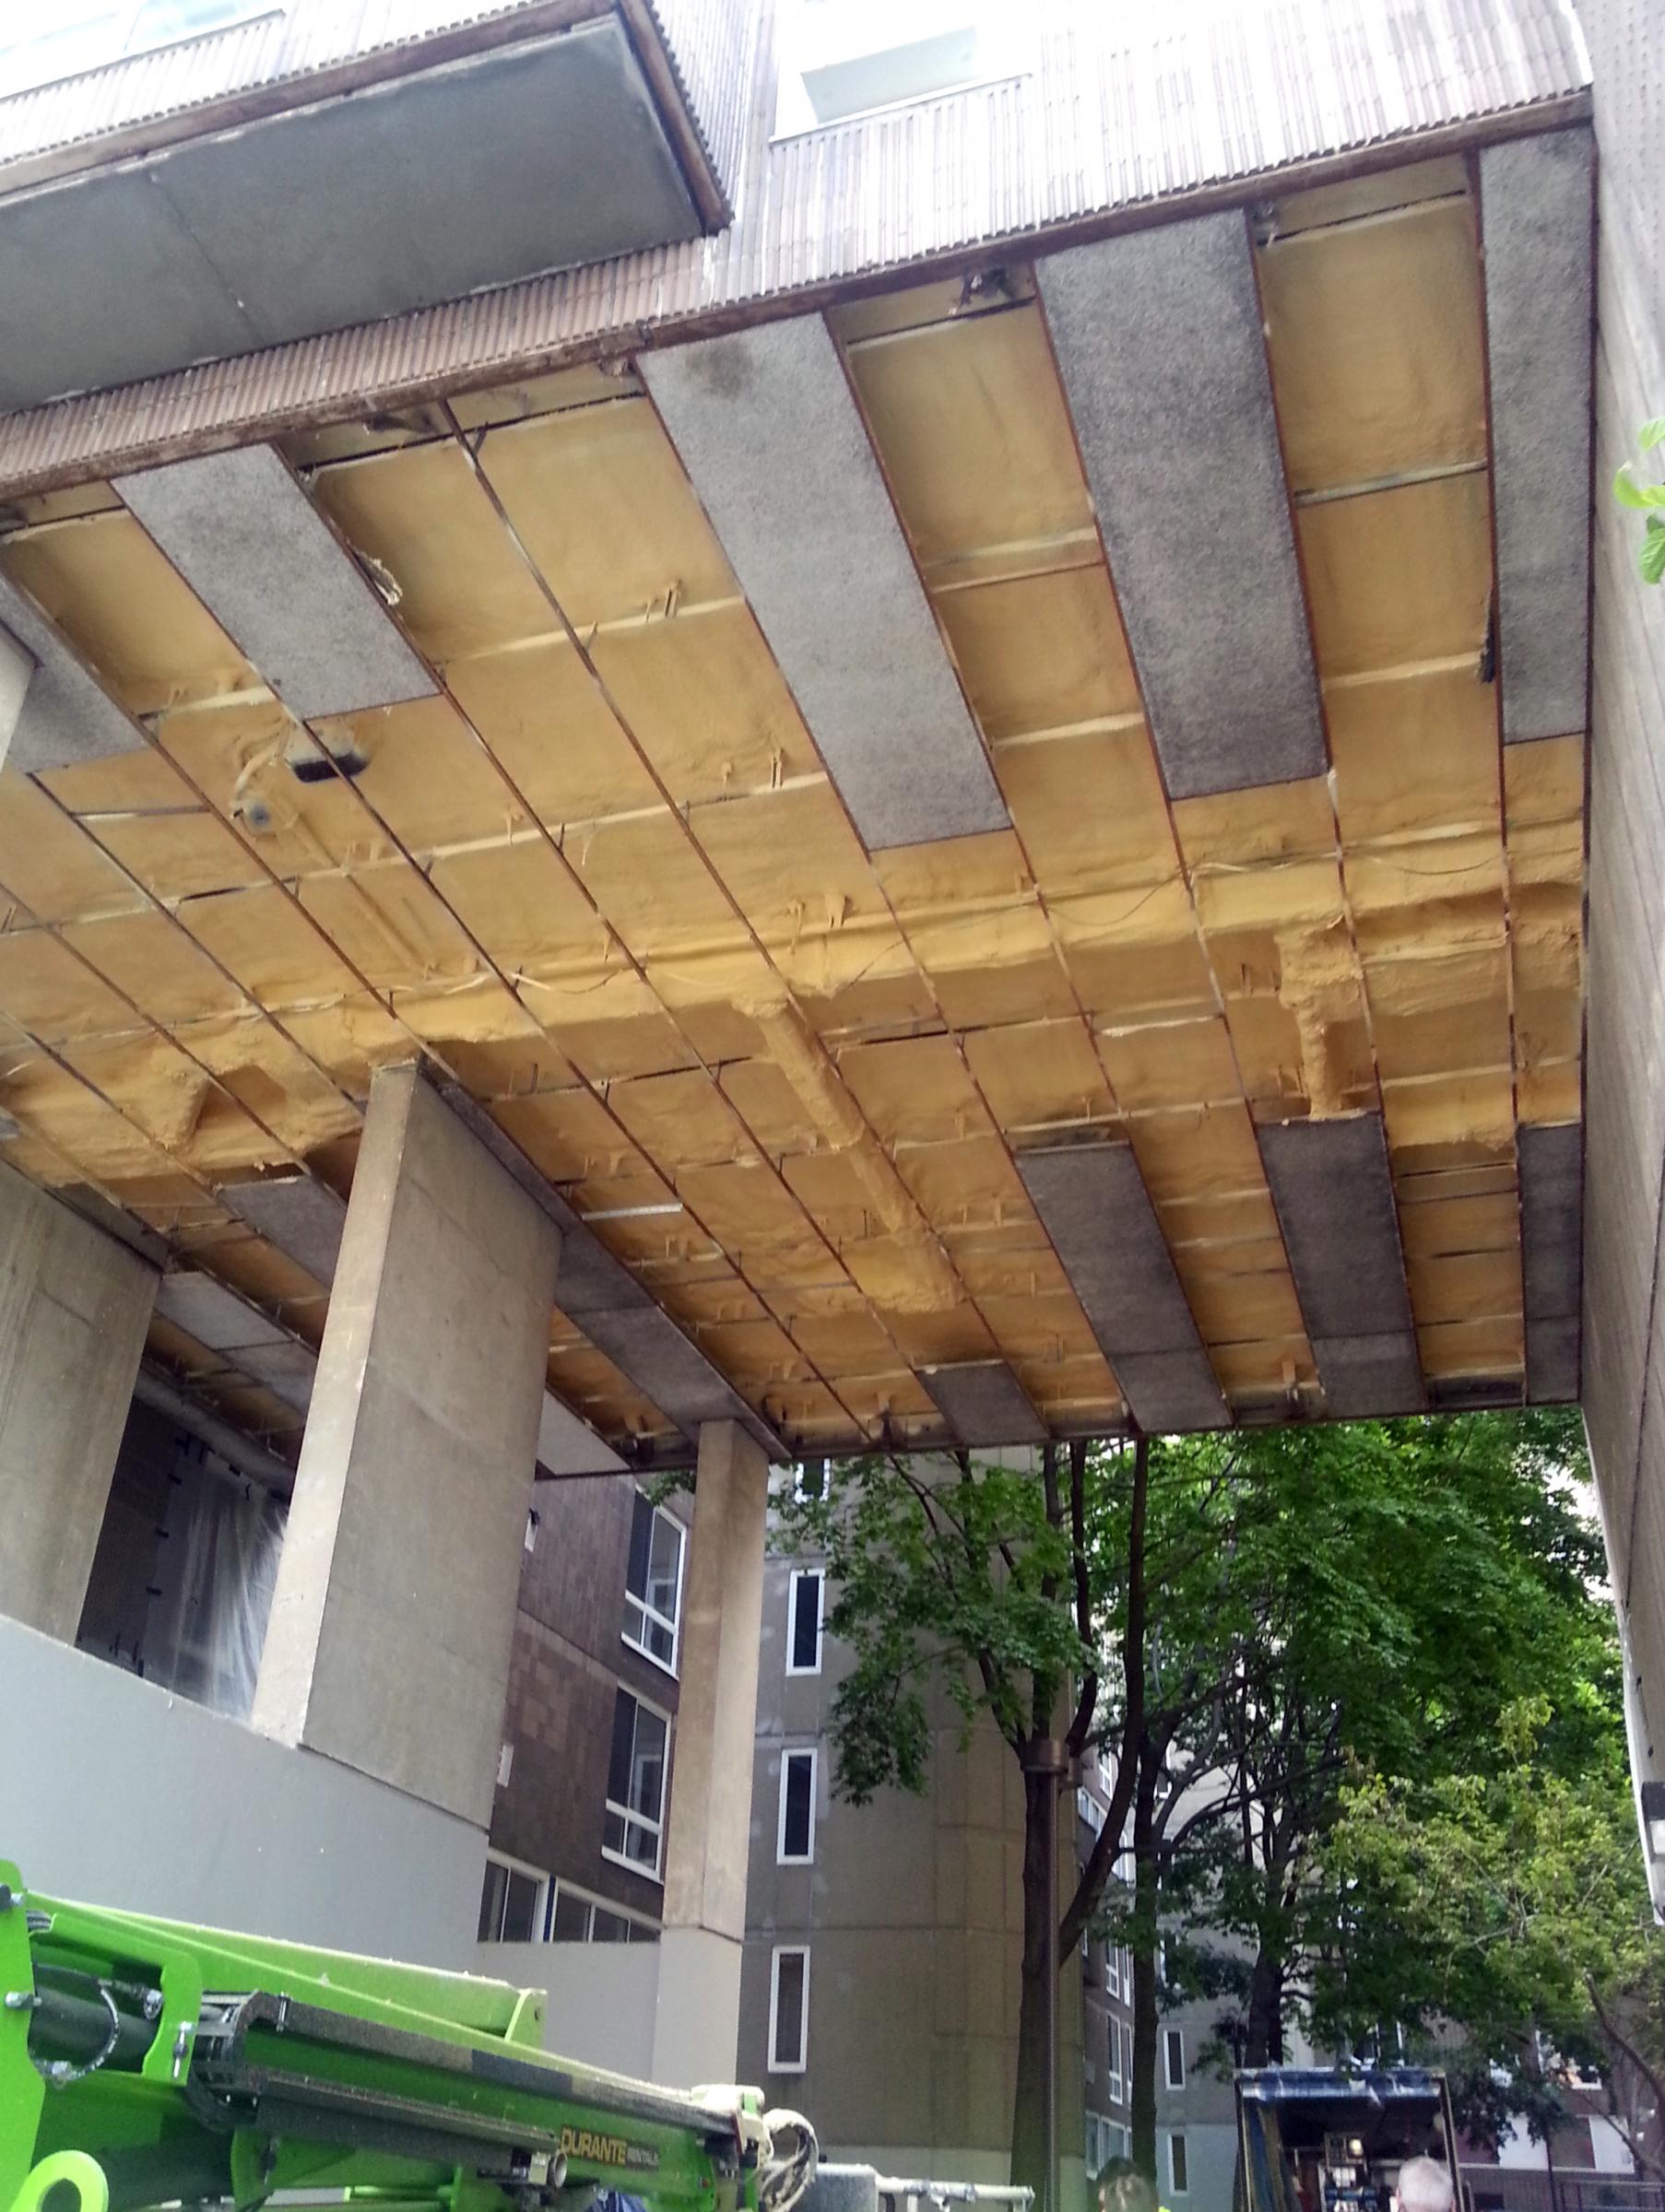 INSuLATIoN IS BEINg INSTALLED uNDER AN ExTERIoR FLooR AT RooSEvELT LANDINgS. ThE PhoTo WAS TAkEN oN JuNE 26, 2013.